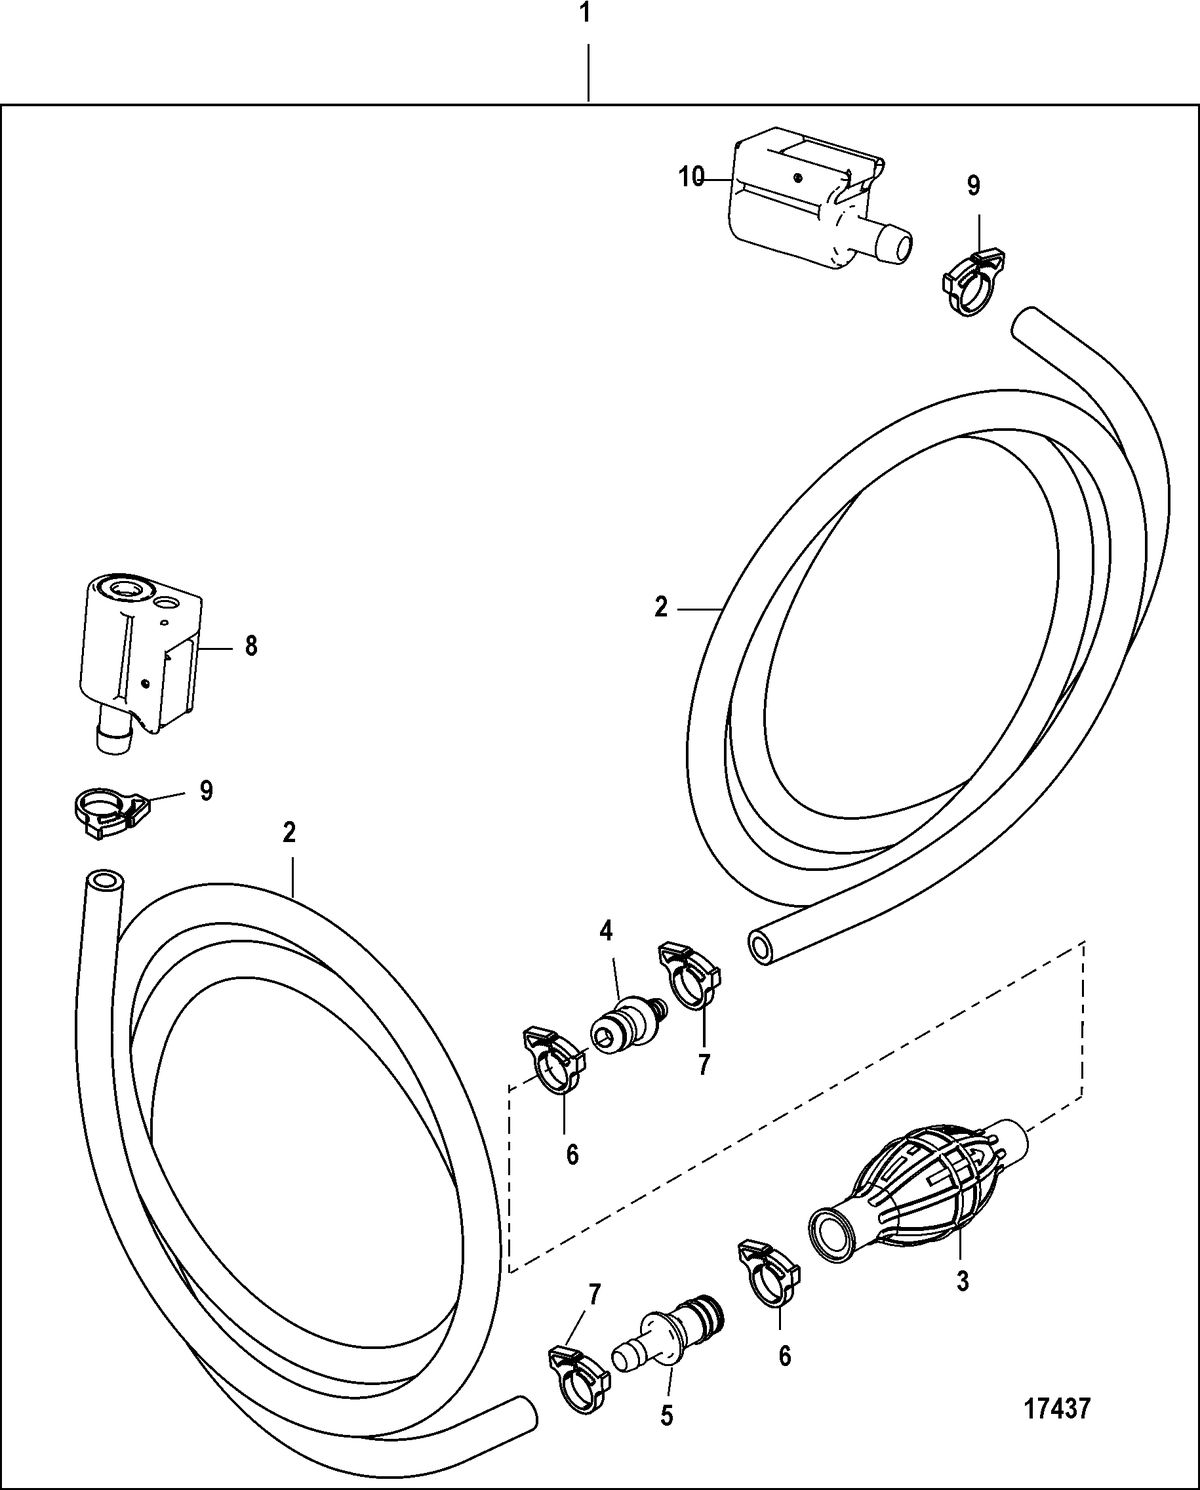 ACCESSORIES FUEL/OIL TANKS, LINES, FILTER KITS AND CORROSION Fuel Line Assembly (Dual Clip on Disconnect-Design I)